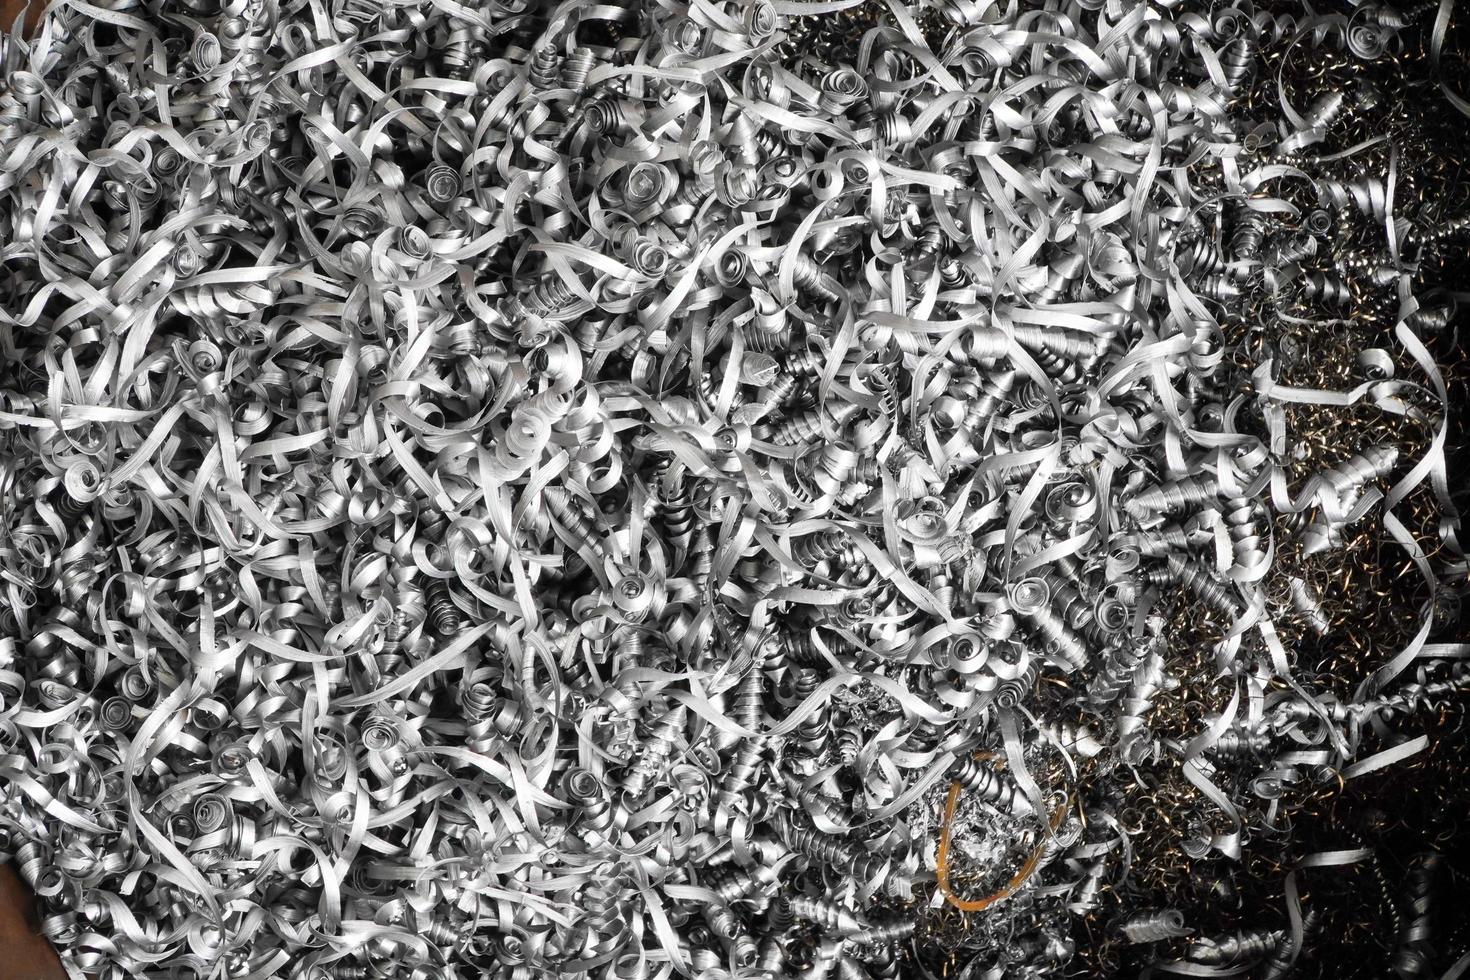 steel scrap materials recycling. aluminum chip waste after machining metal parts on a cnc lathe. closeup twisted spiral steel shavings. small roughness sharpness. photo